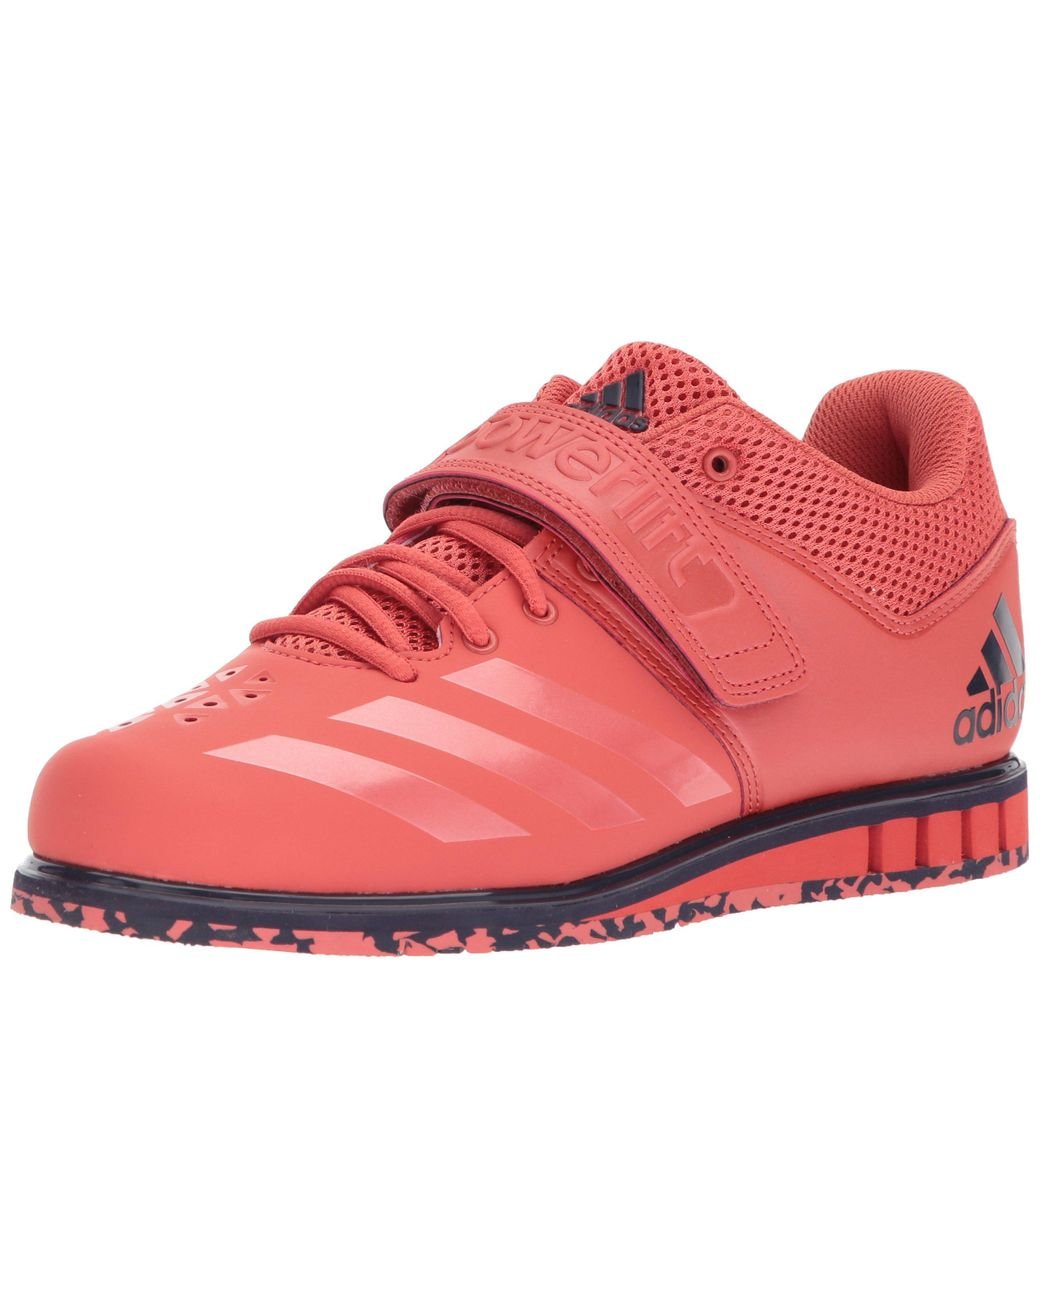 Hija Llorar Contra la voluntad adidas Powerlift 3.1 Shoes in Red for Men | Lyst